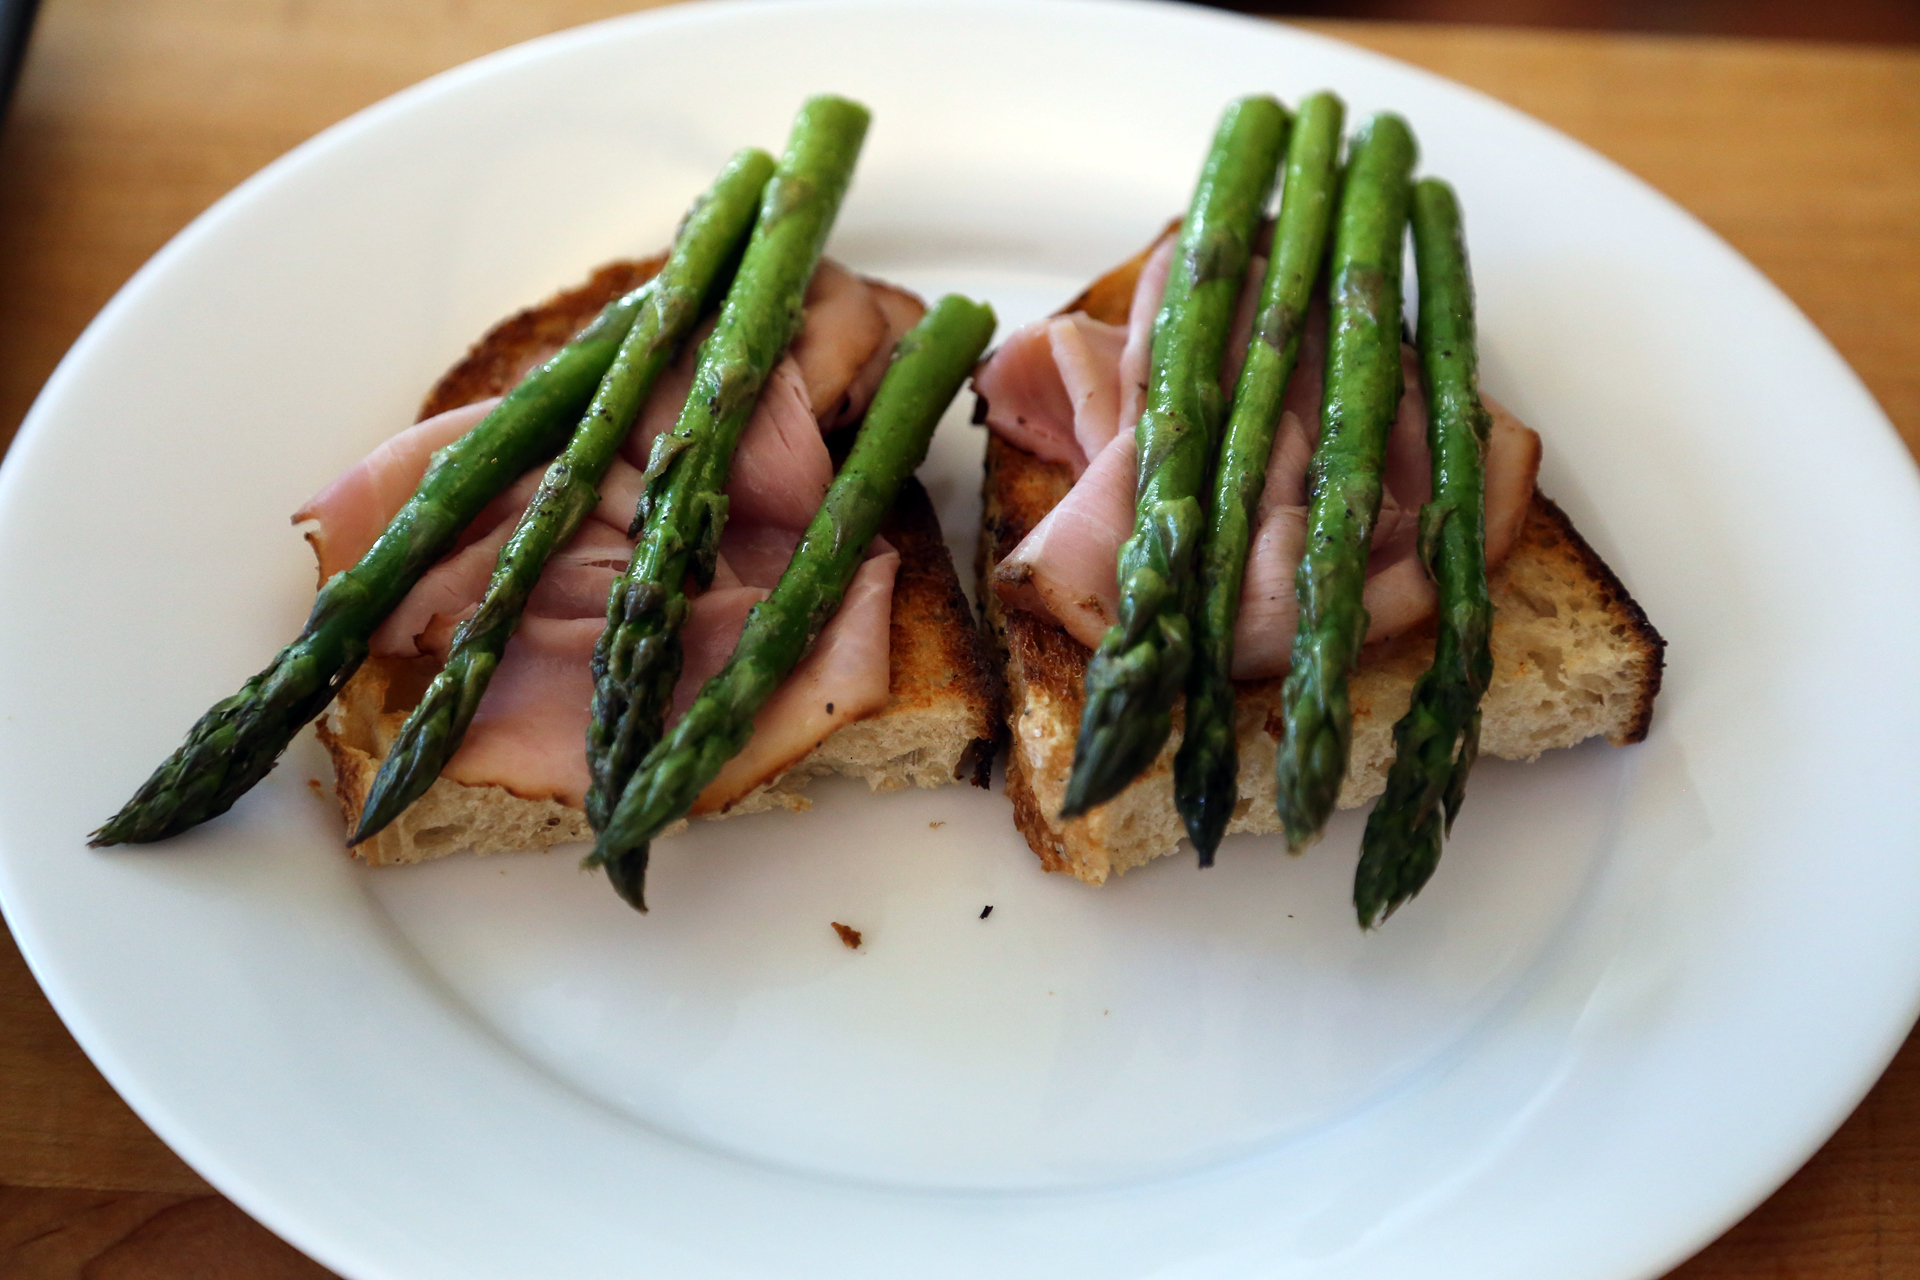 Divide the toast between warmed individual plates, using 1 or 2 slices per plate. Top each slice with a slice of ham, then divide the asparagus between the toasts.